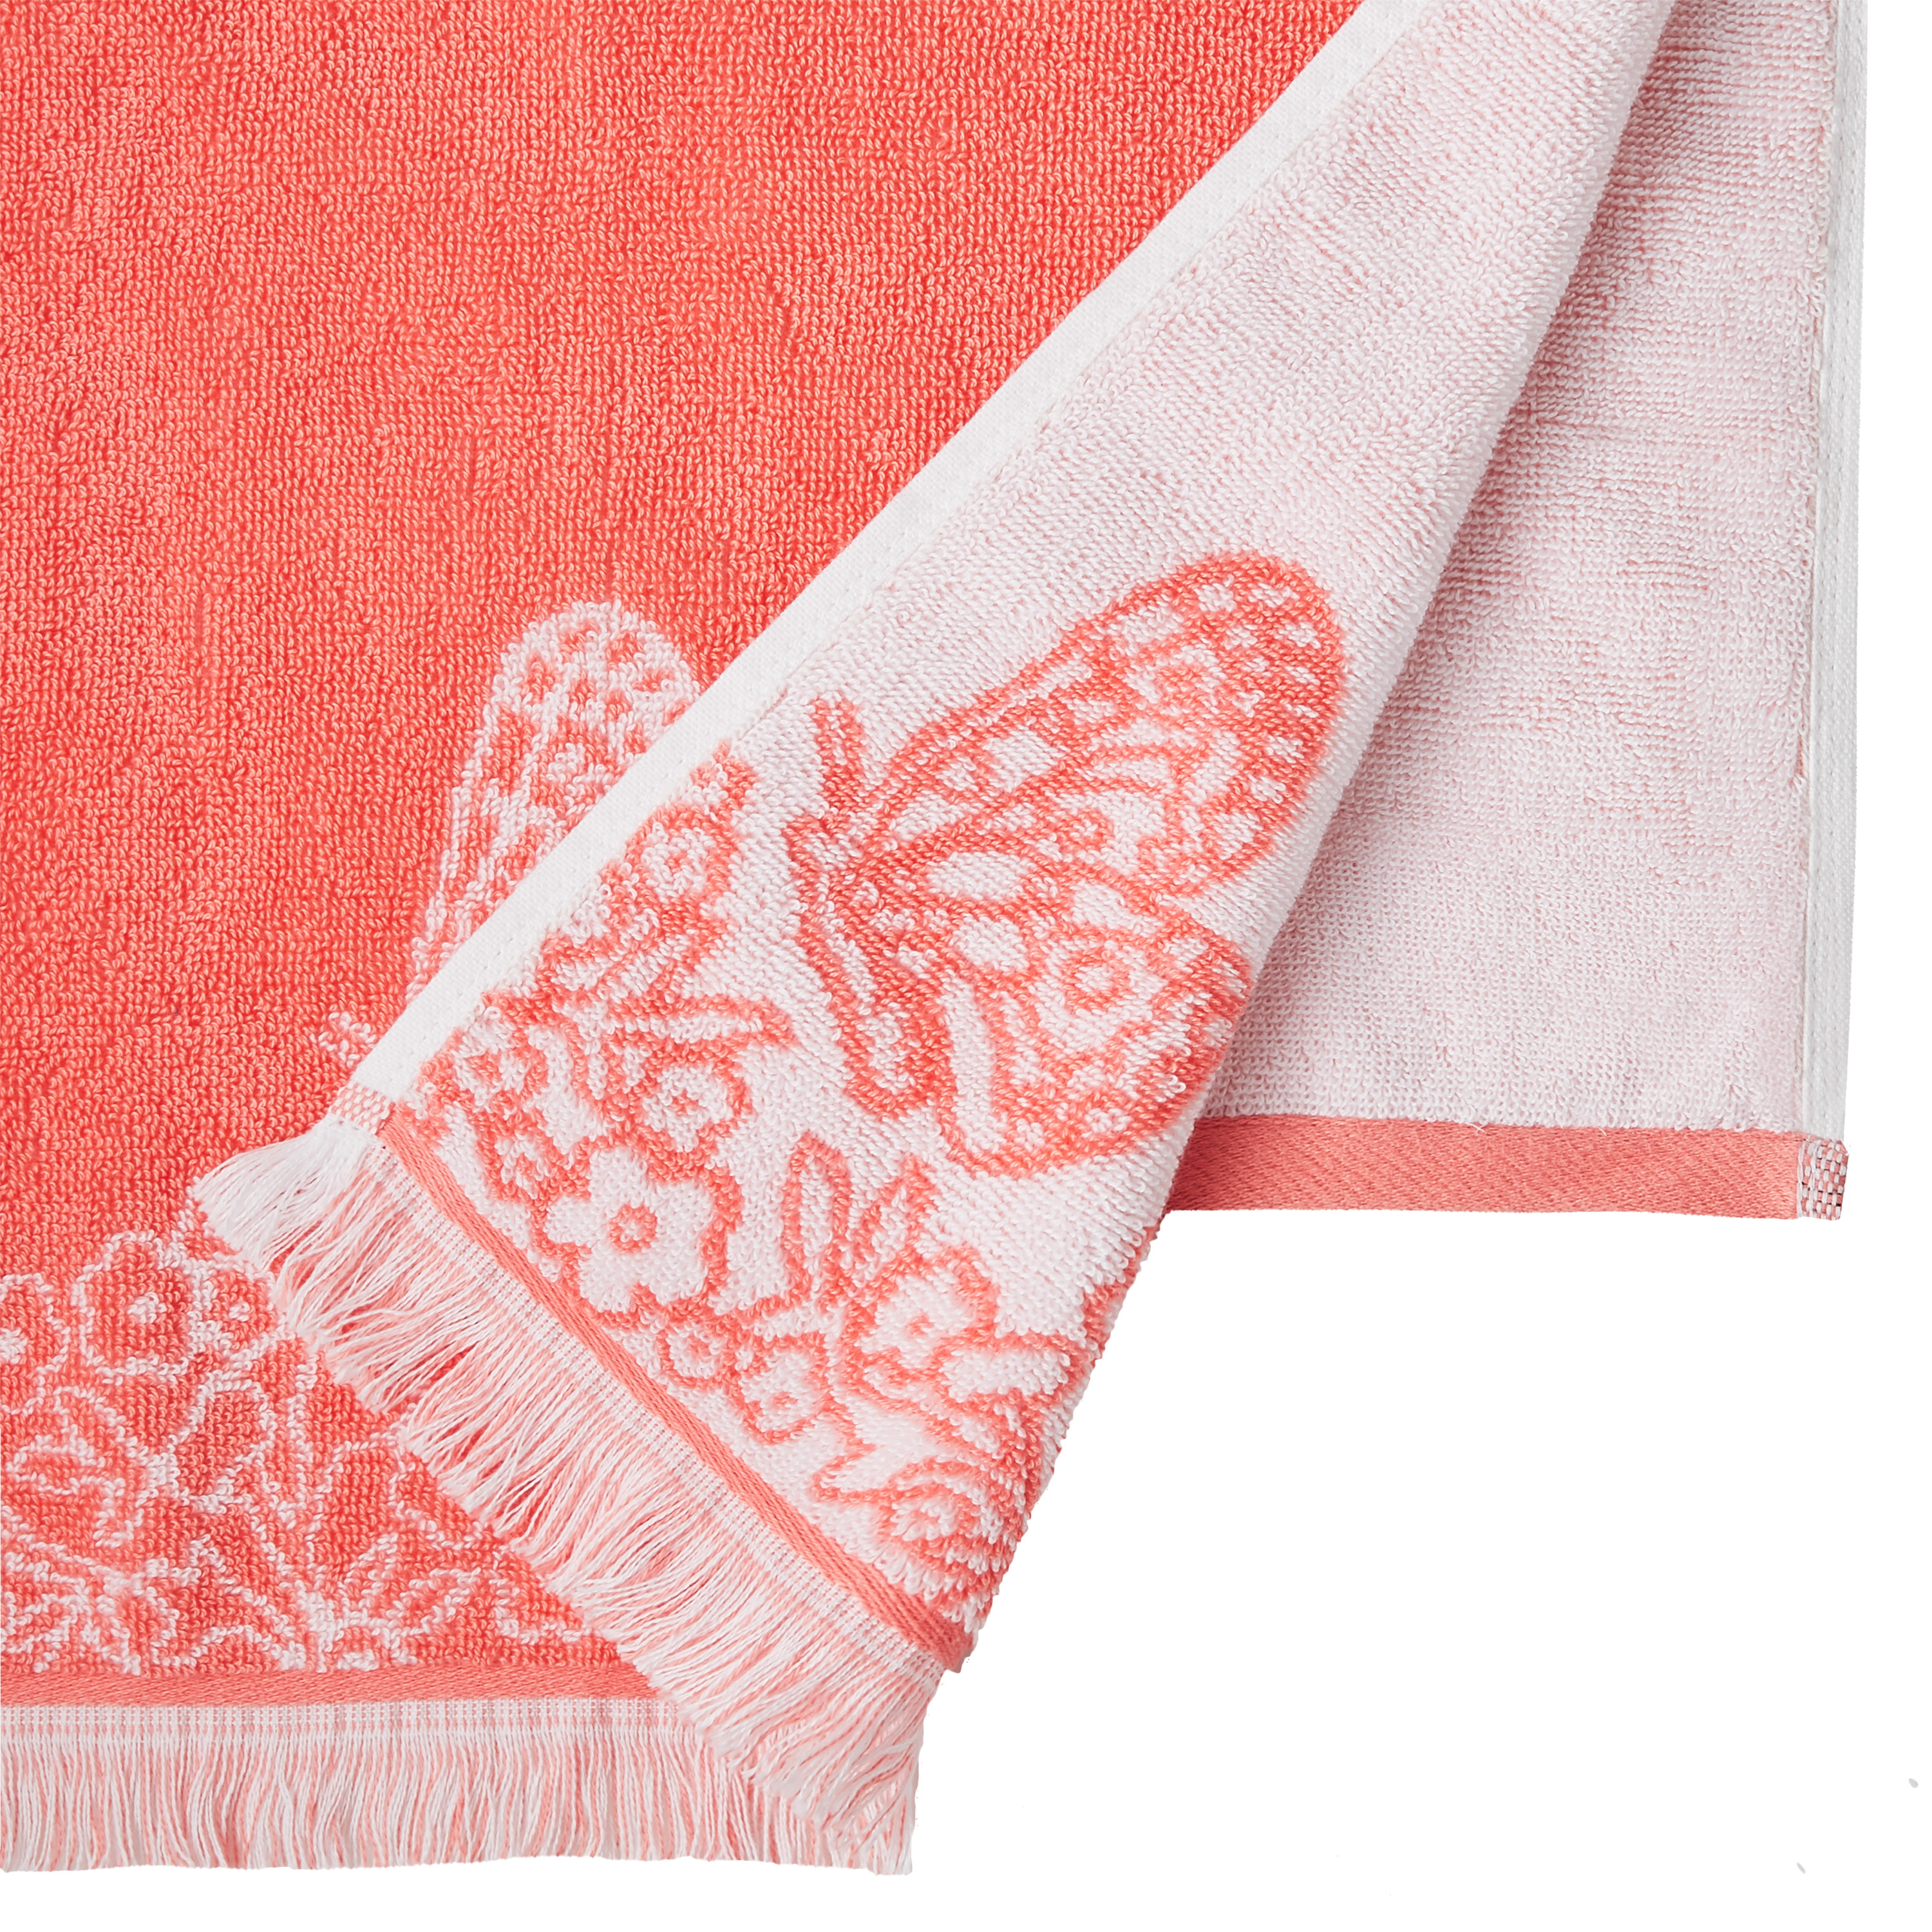 The Pioneer Woman Butterfly Garden 2-Pack Cotton Hand Towel Set, Coral Bell - image 2 of 5